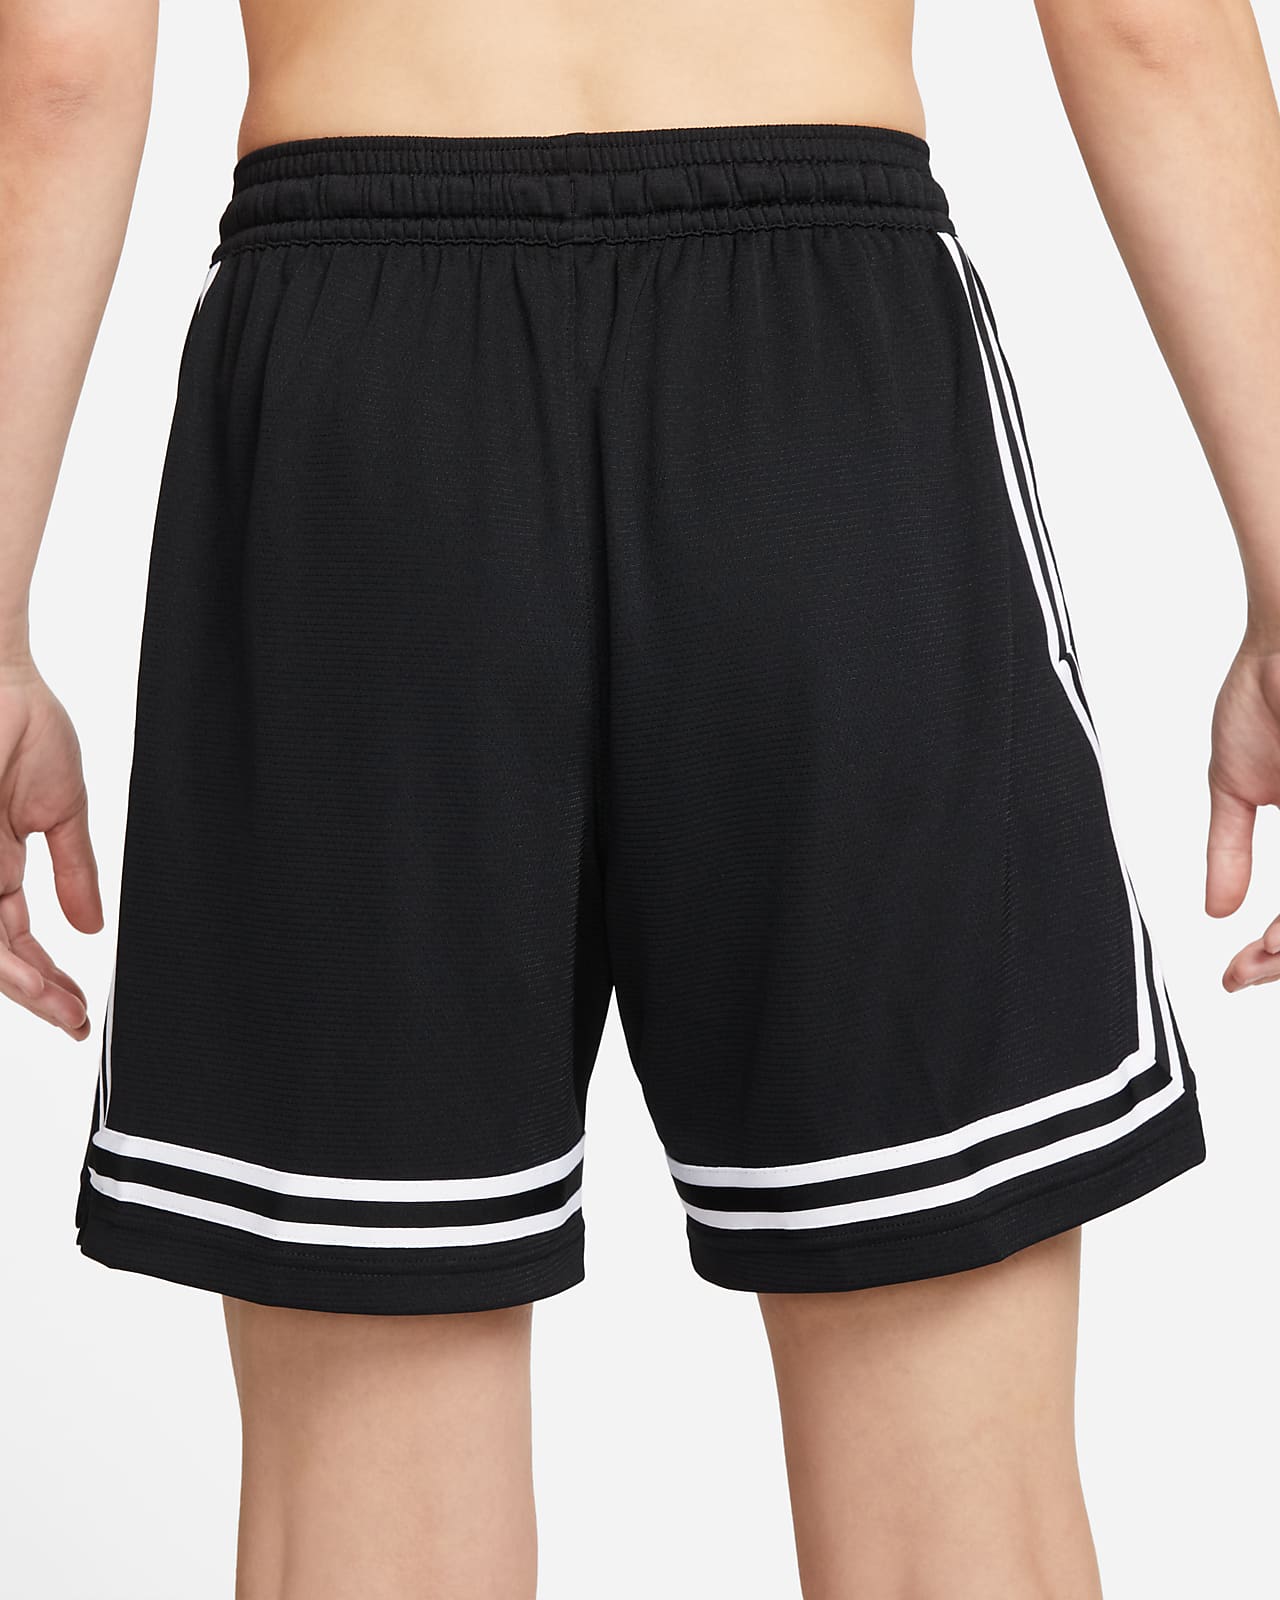 Nike Dri-FIT Culture of Basketball Fly Crossover Big Kids' (Girls